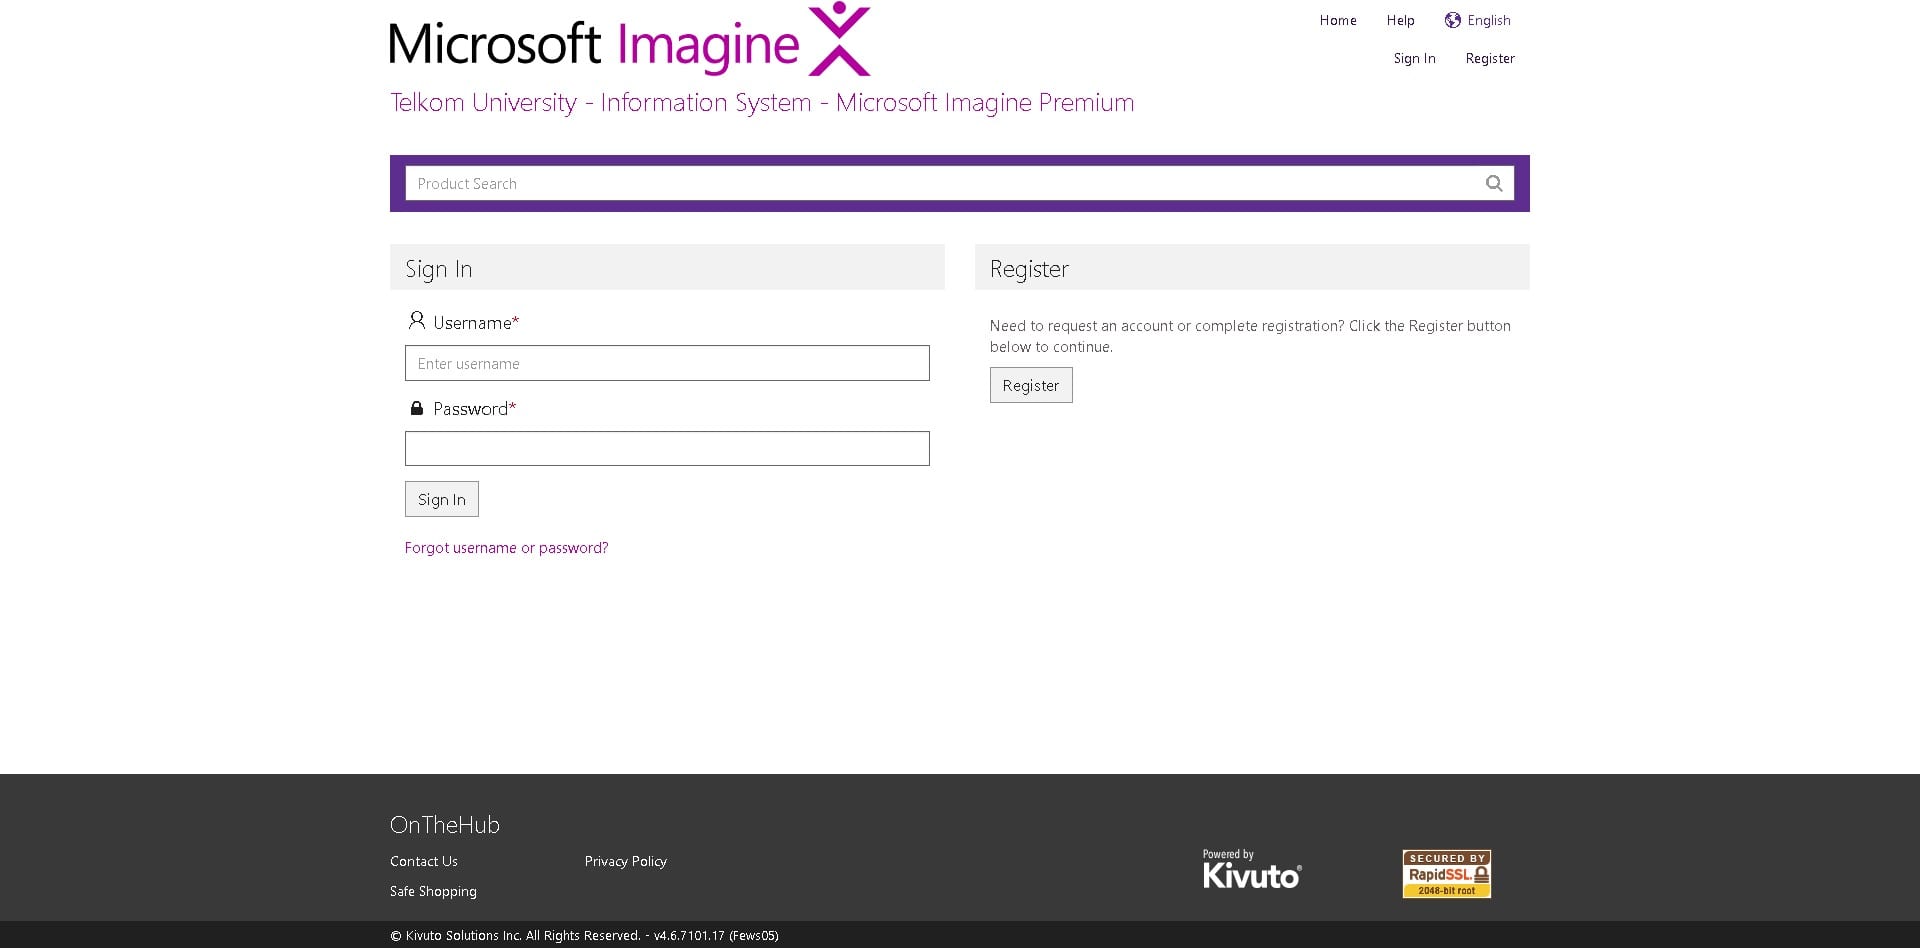 Microsoft Imagine will become Azure Dev Tools for Teaching